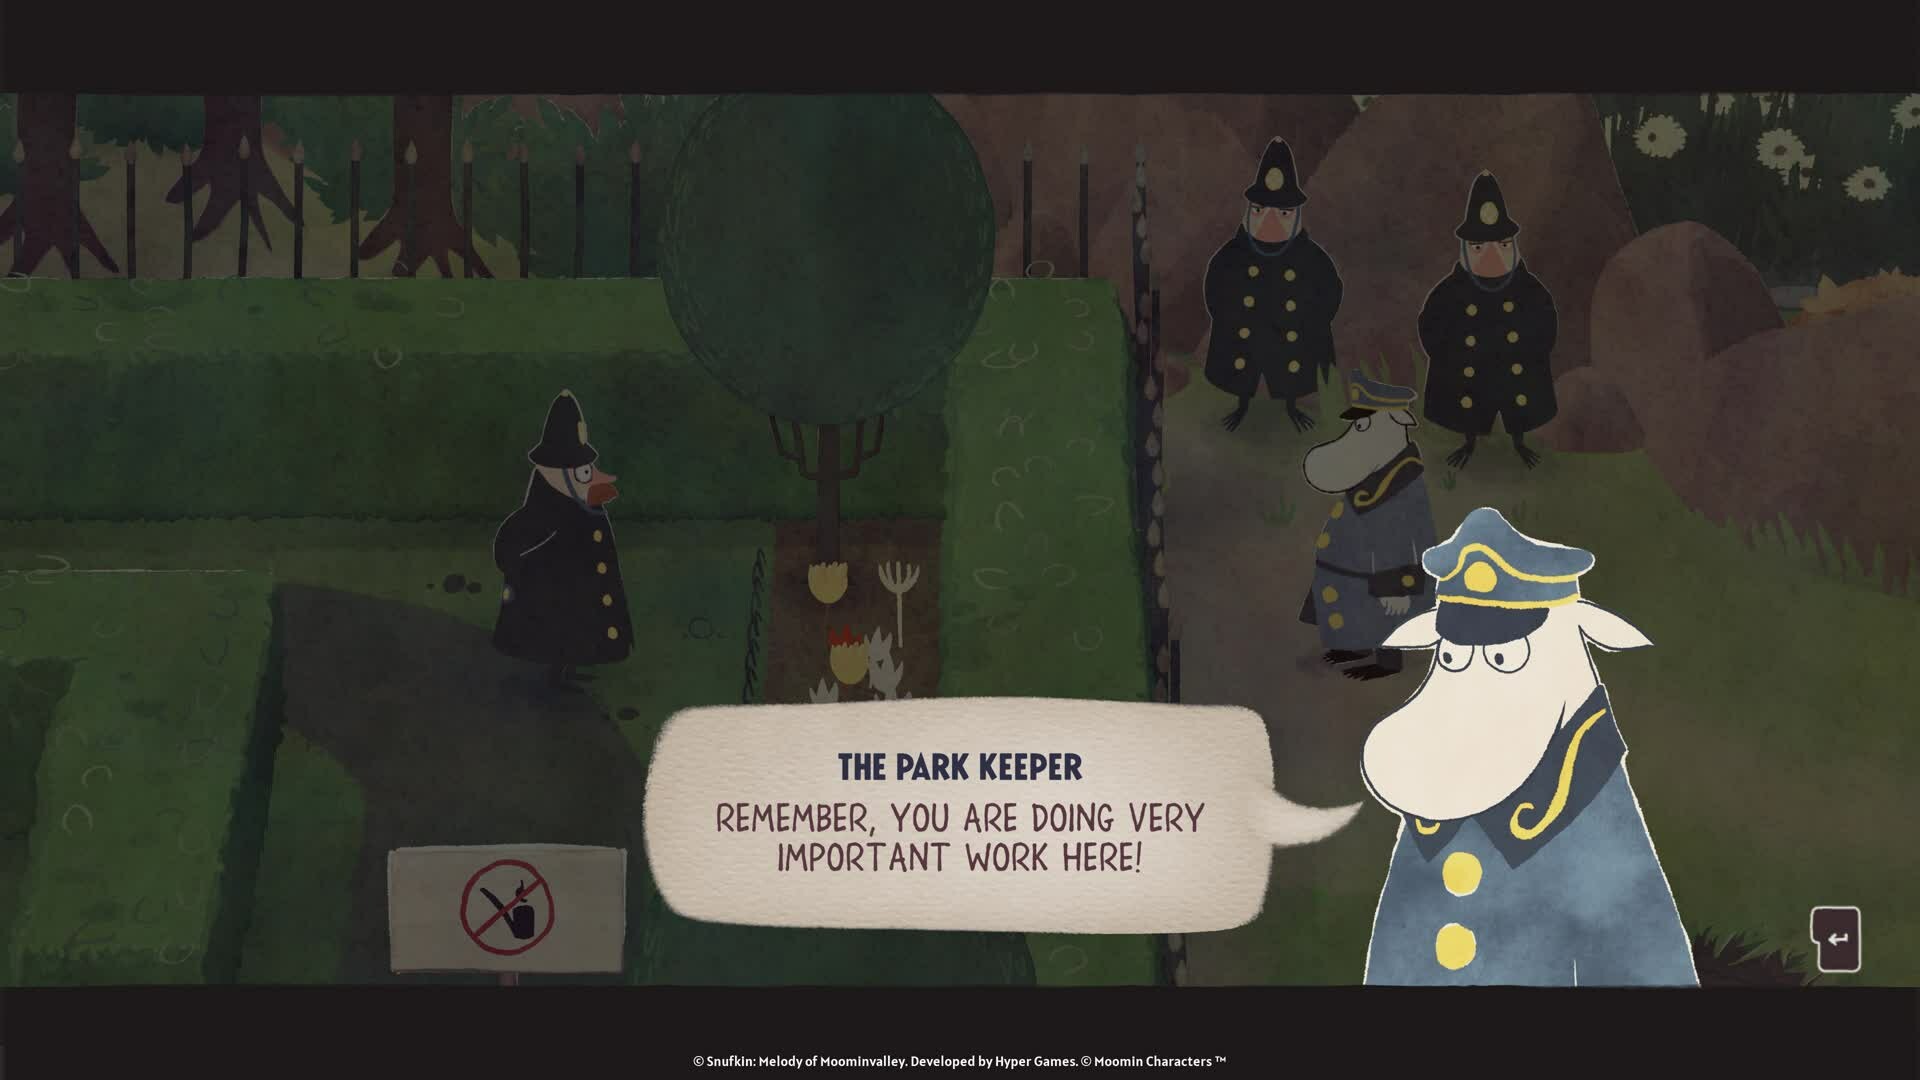 A Park Keeper speaks in Snufkin: Melody of Moominvalley.